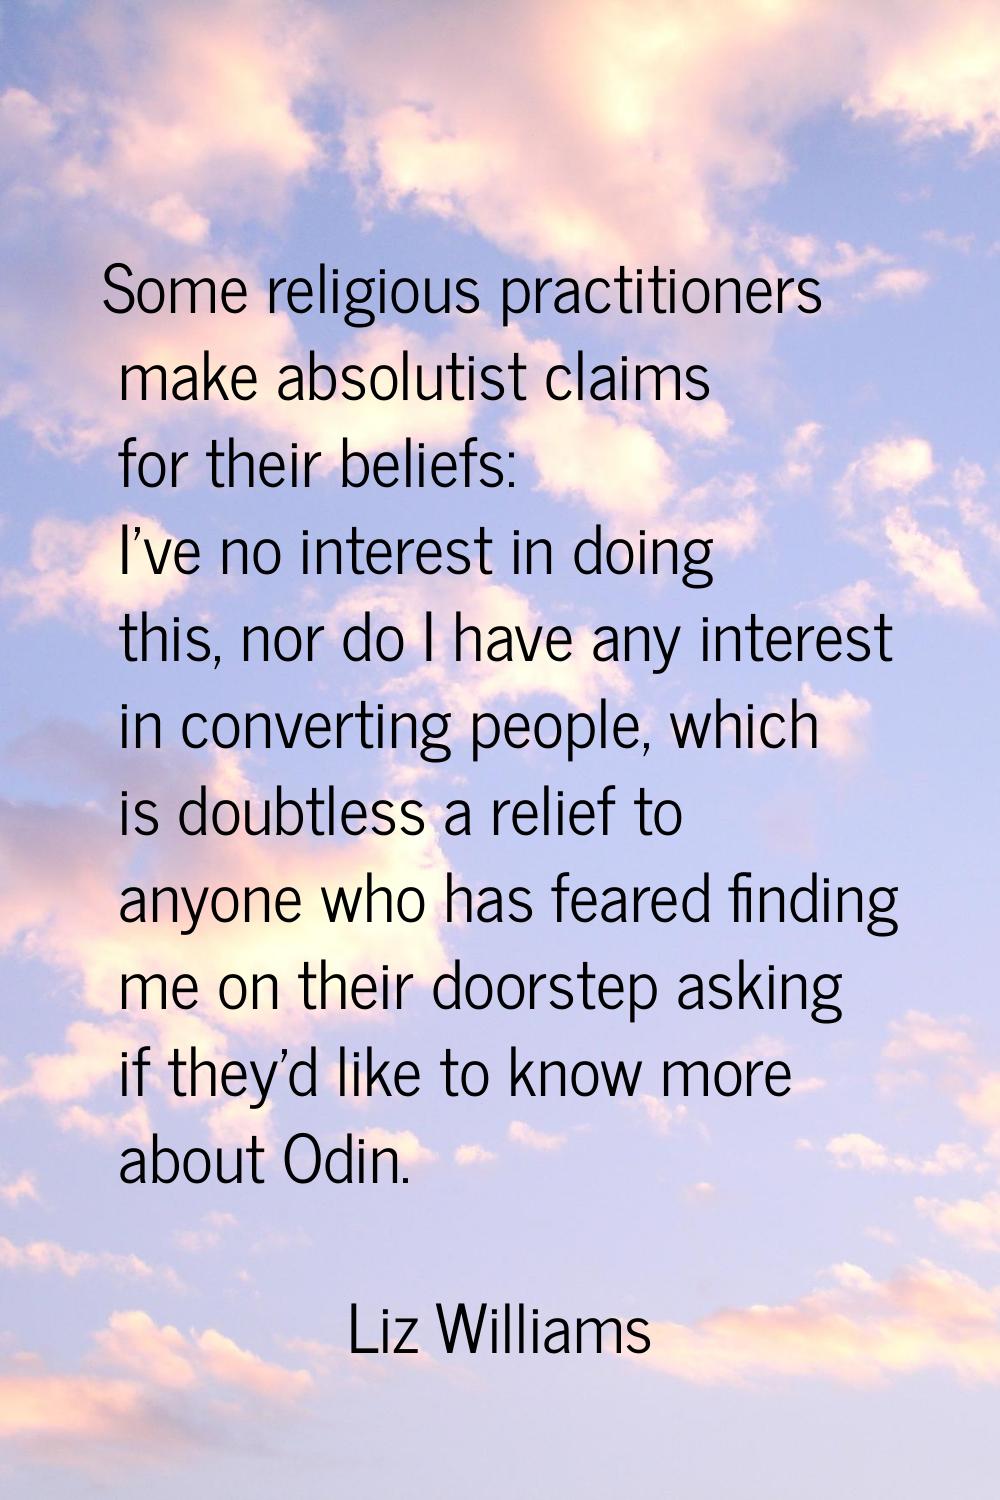 Some religious practitioners make absolutist claims for their beliefs: I've no interest in doing th